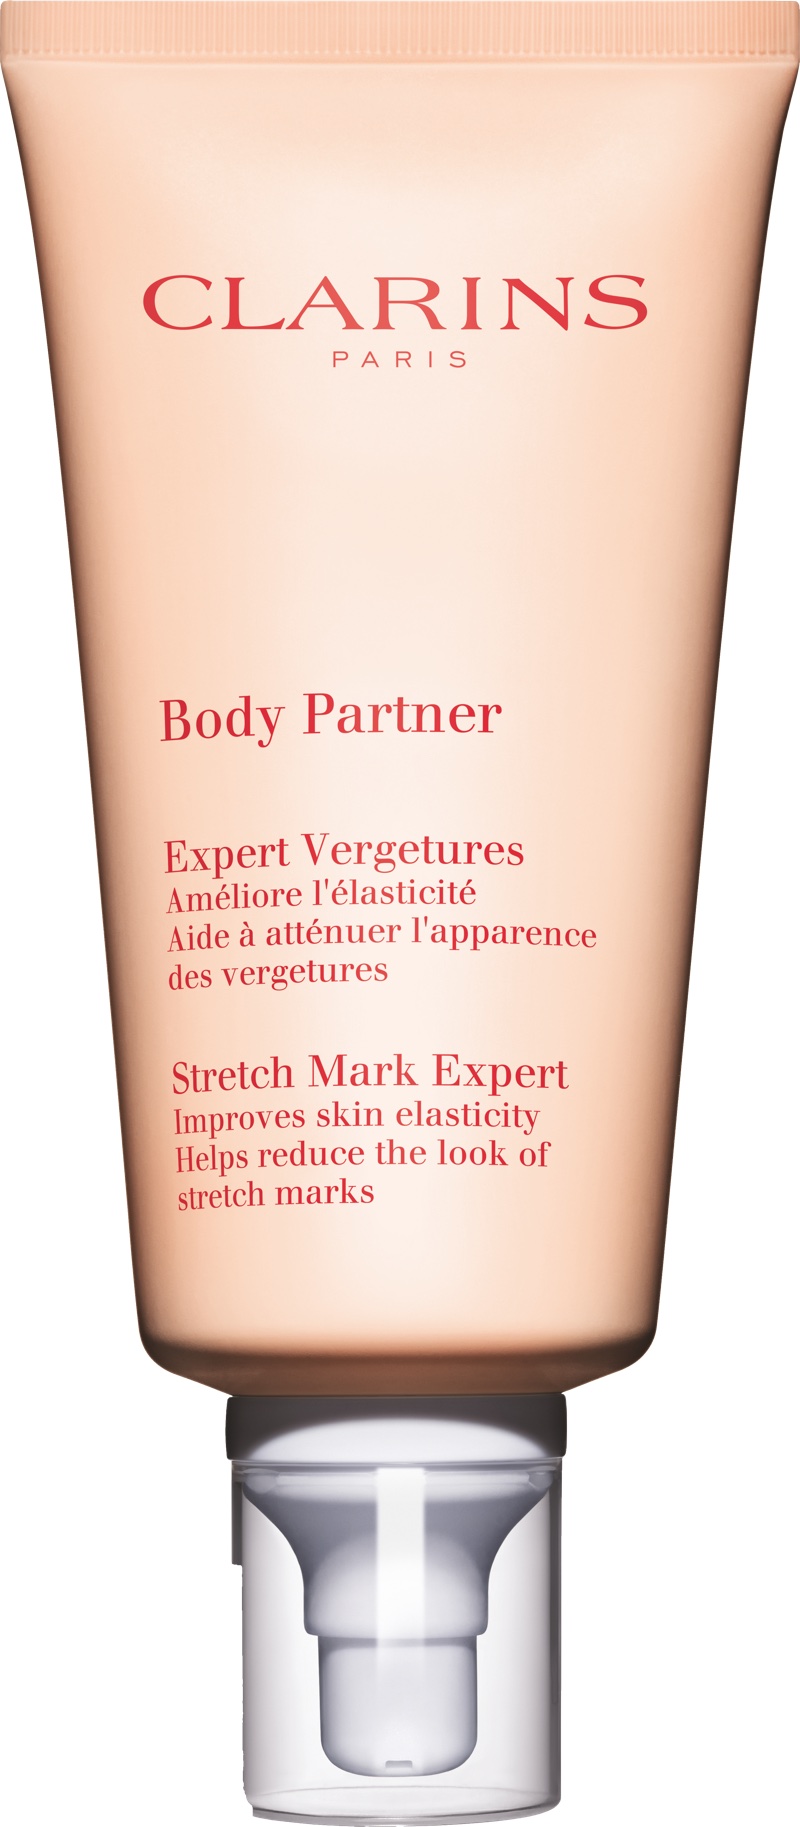 Clarins has revamped this iconic body product for 2020
